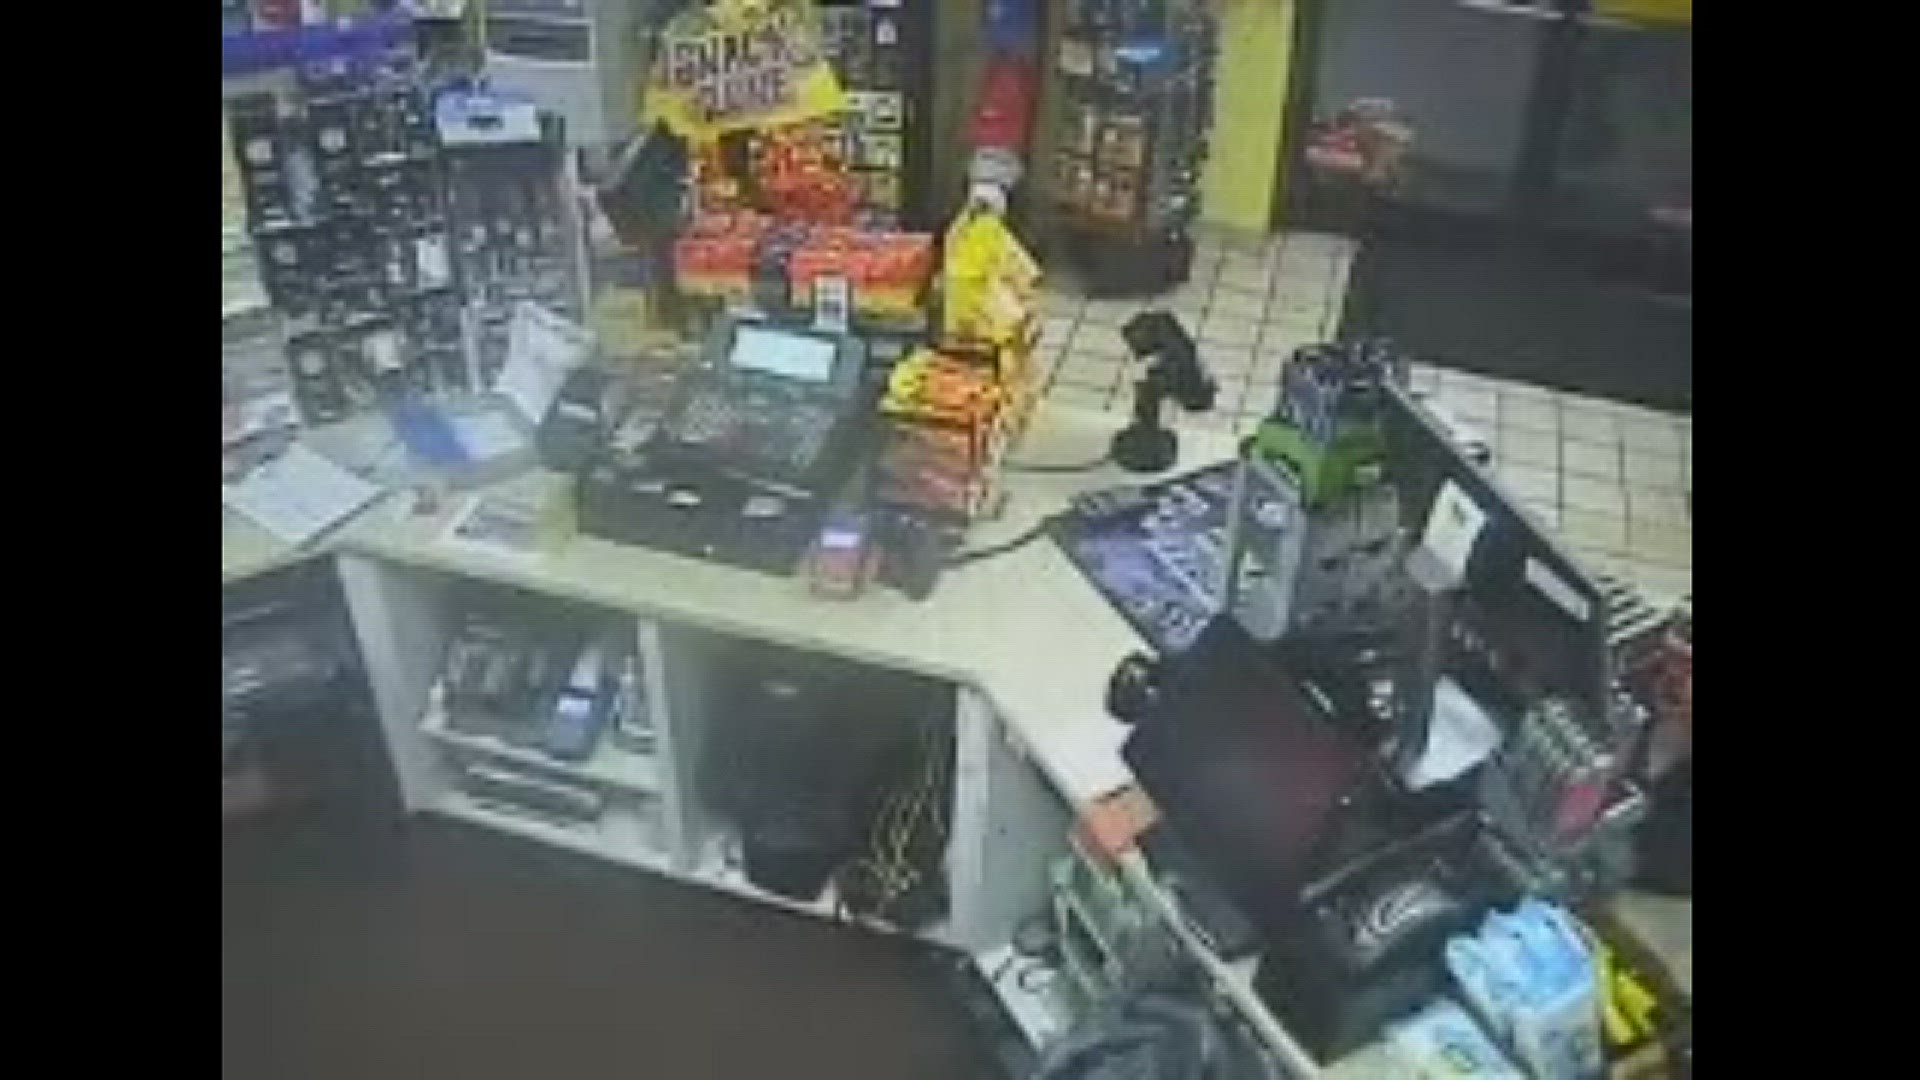 Police said it captured a man that robbed the Breadbox convenience store with a BB gun.